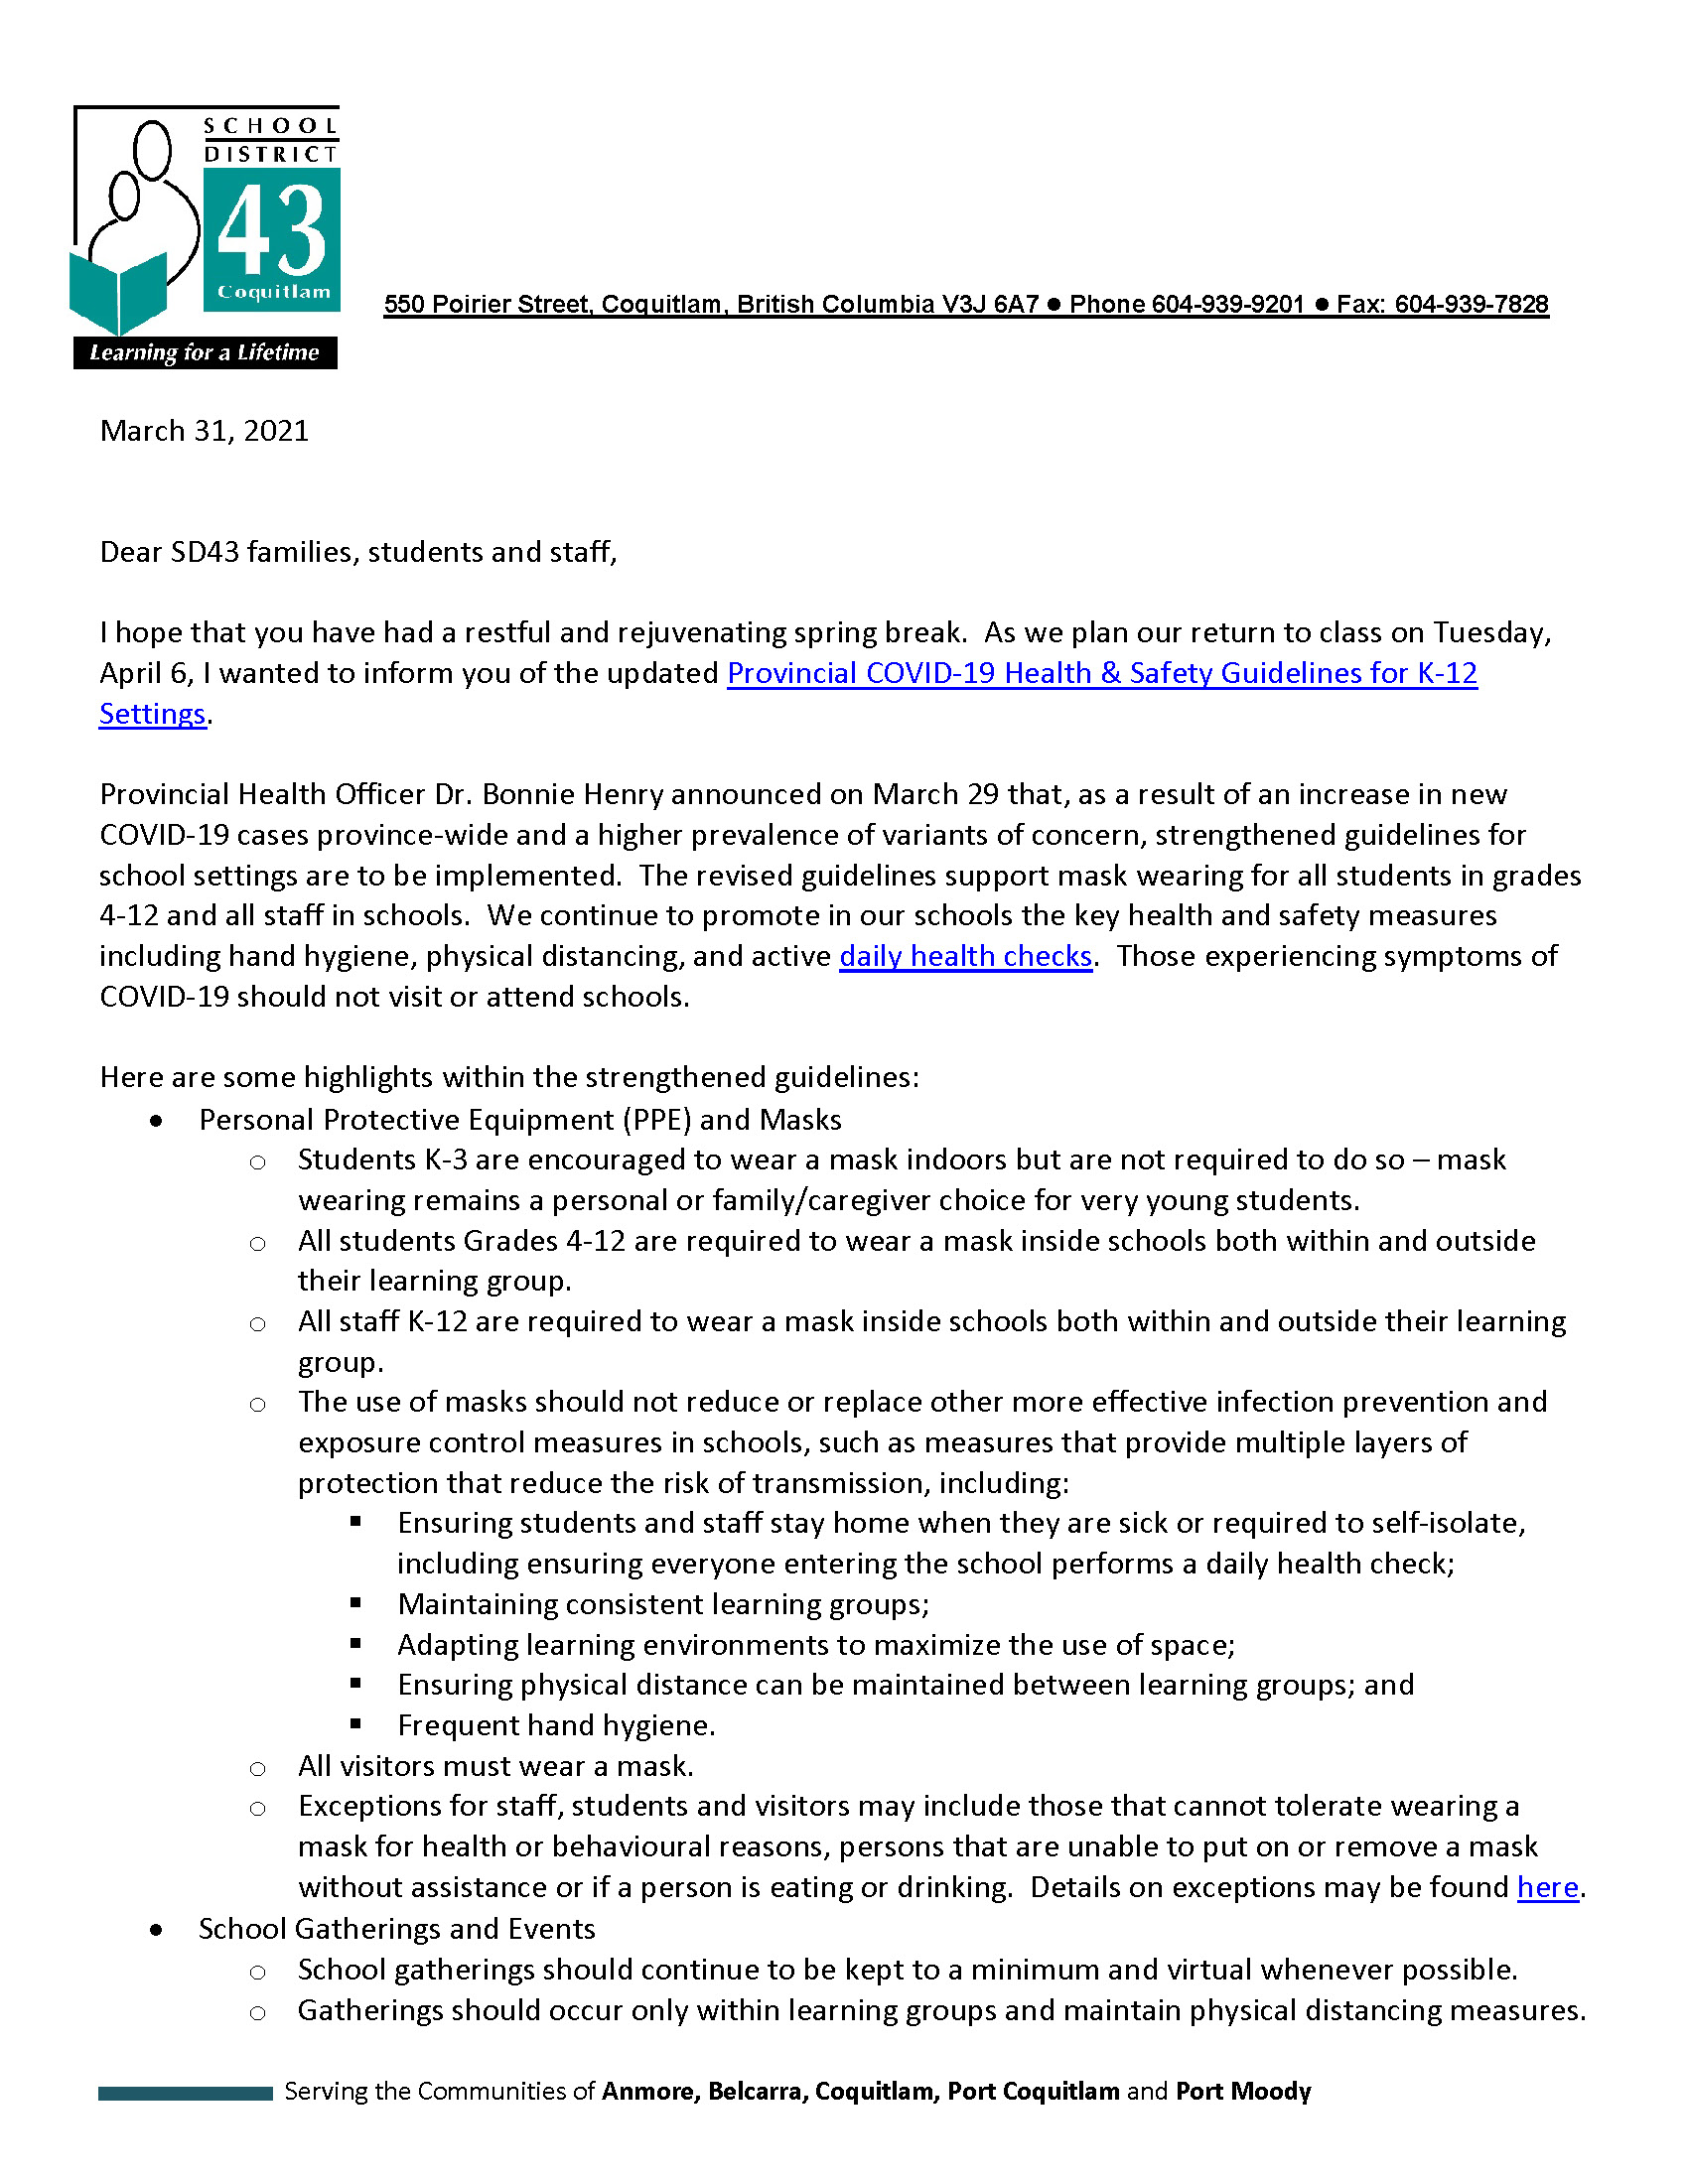 Superintendent letter re Spring Return to School 04-01-2021_Page_1.jpg